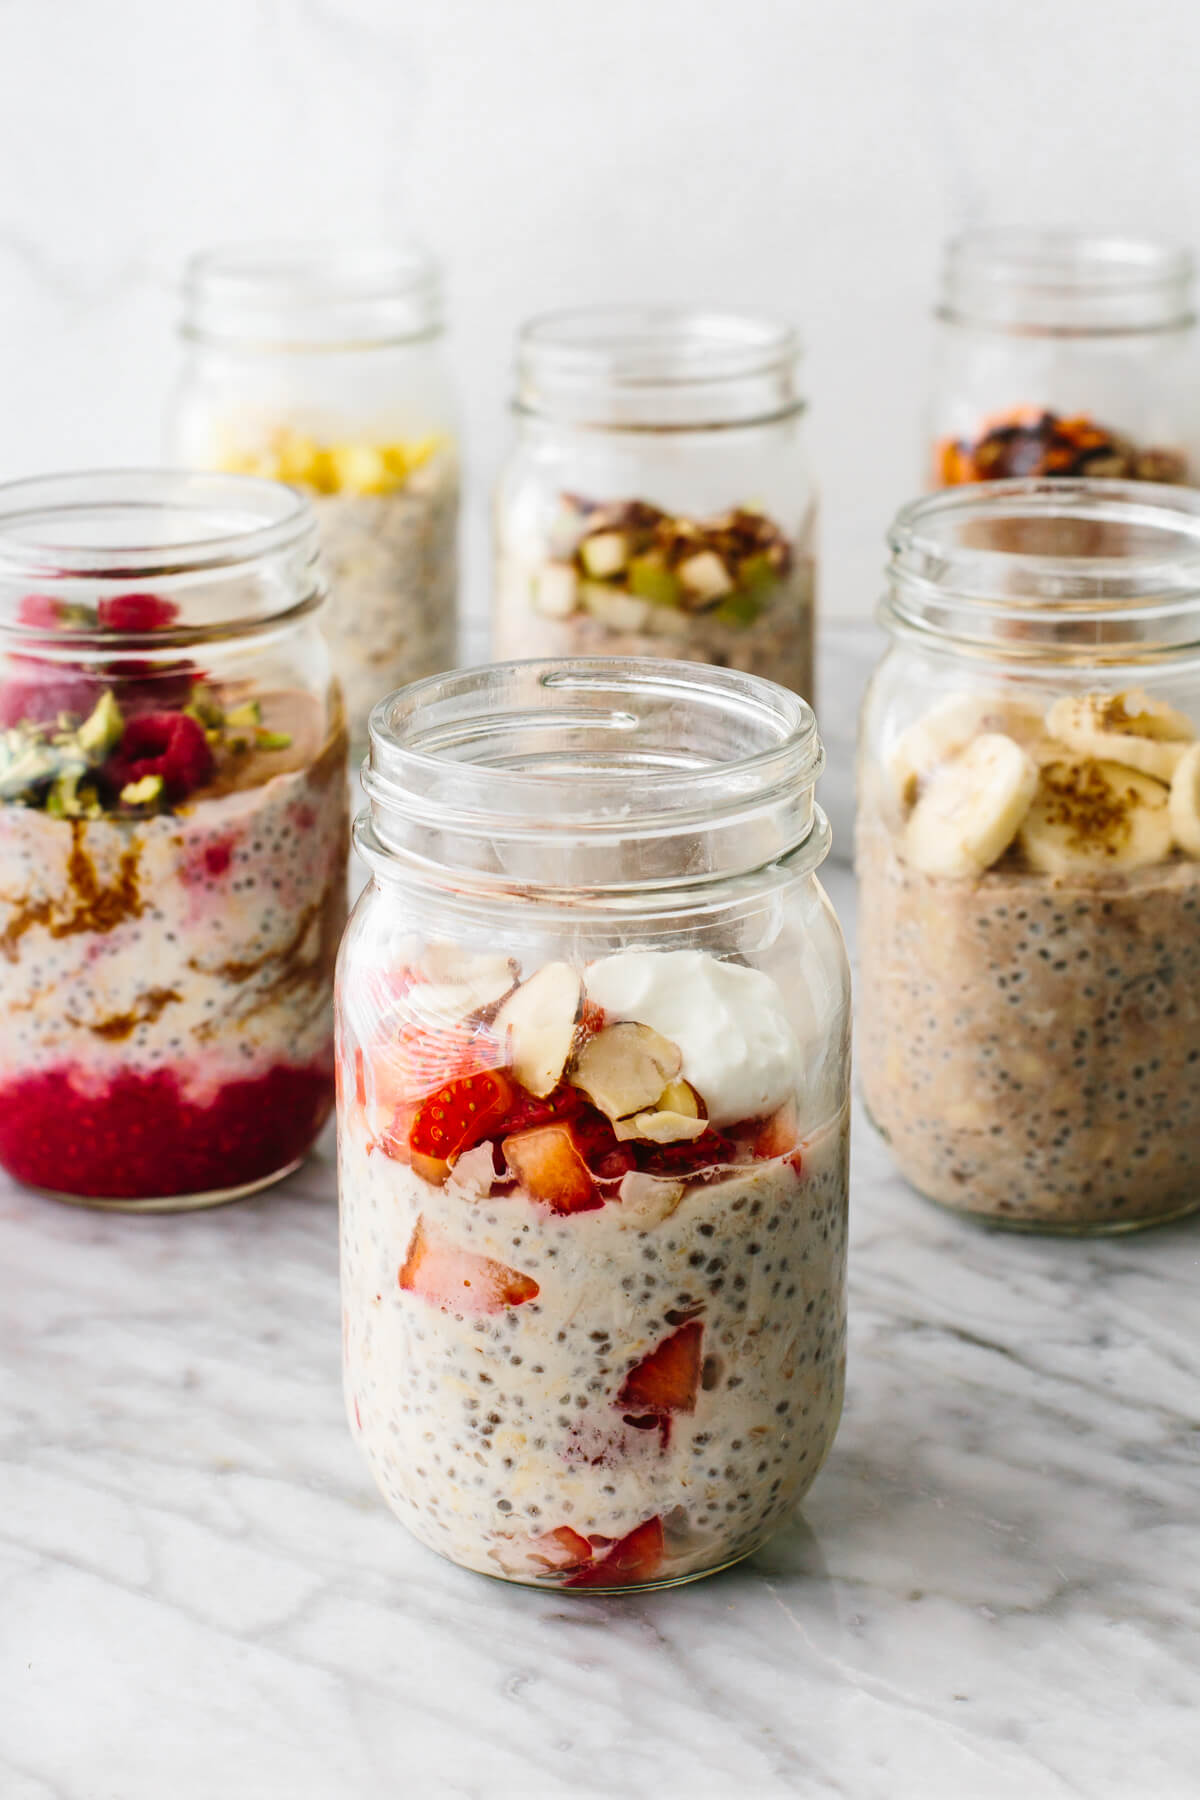 Overnight oats in a few jars with fruits on a table.